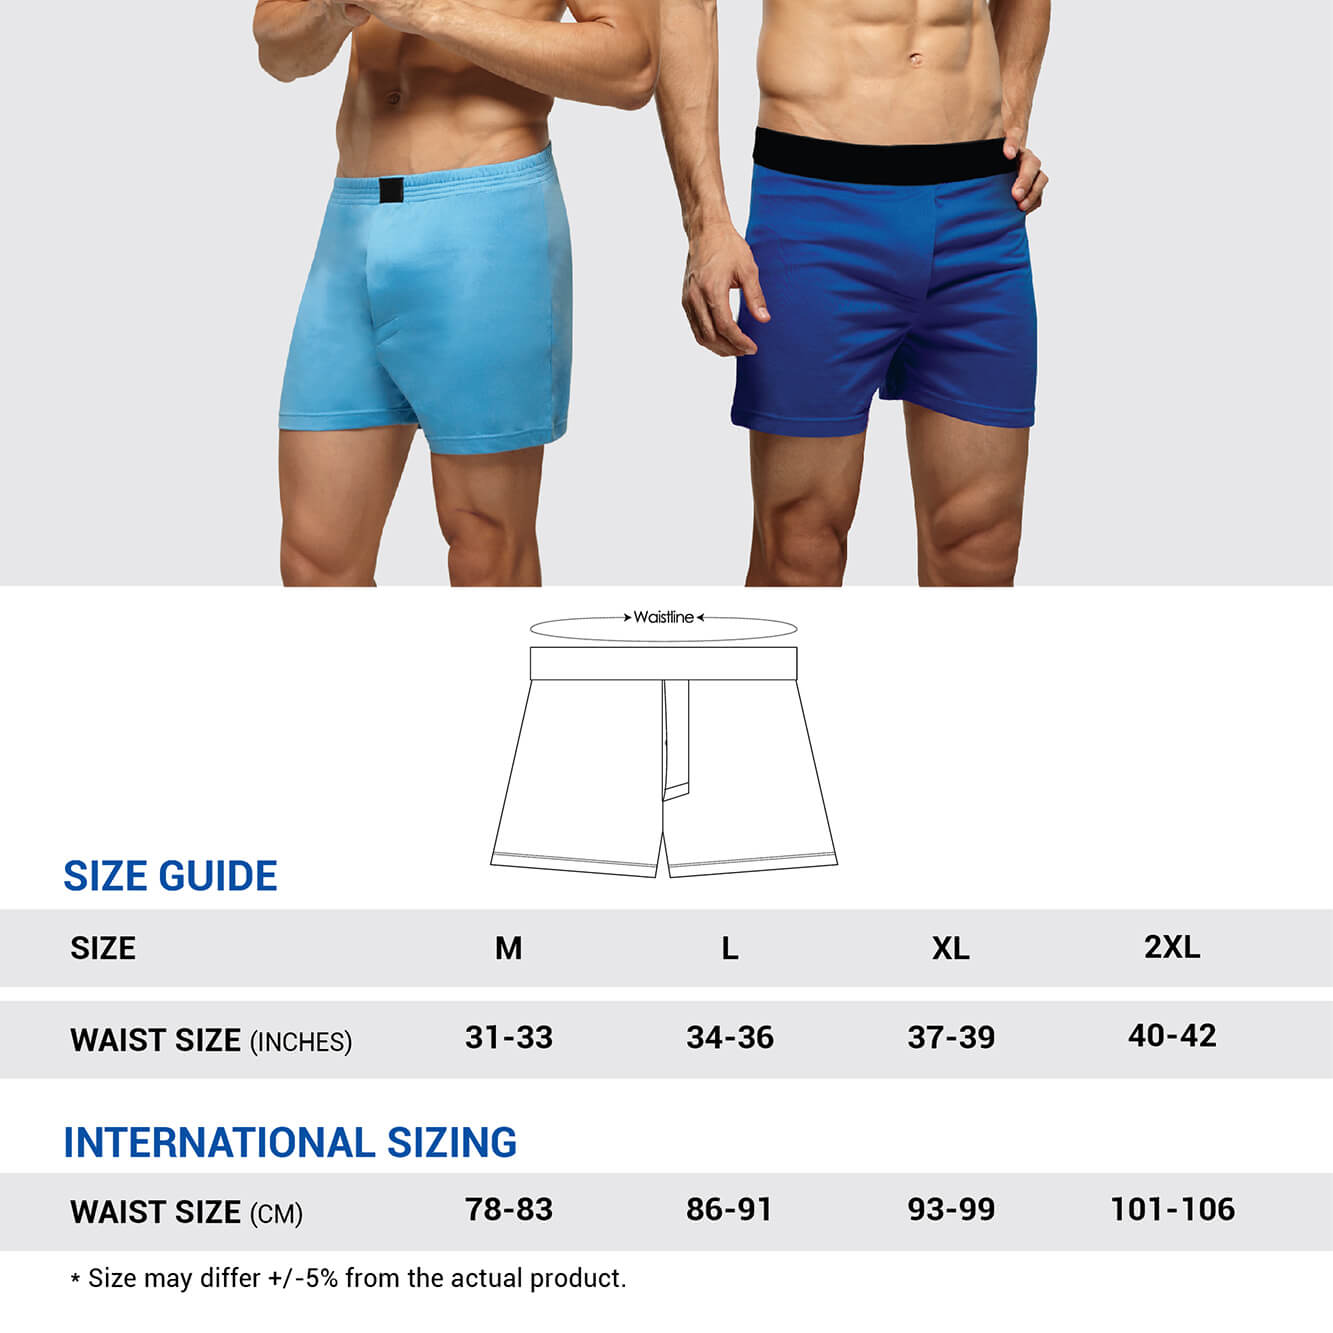 Boxer size chart in inches and CM for international sizing